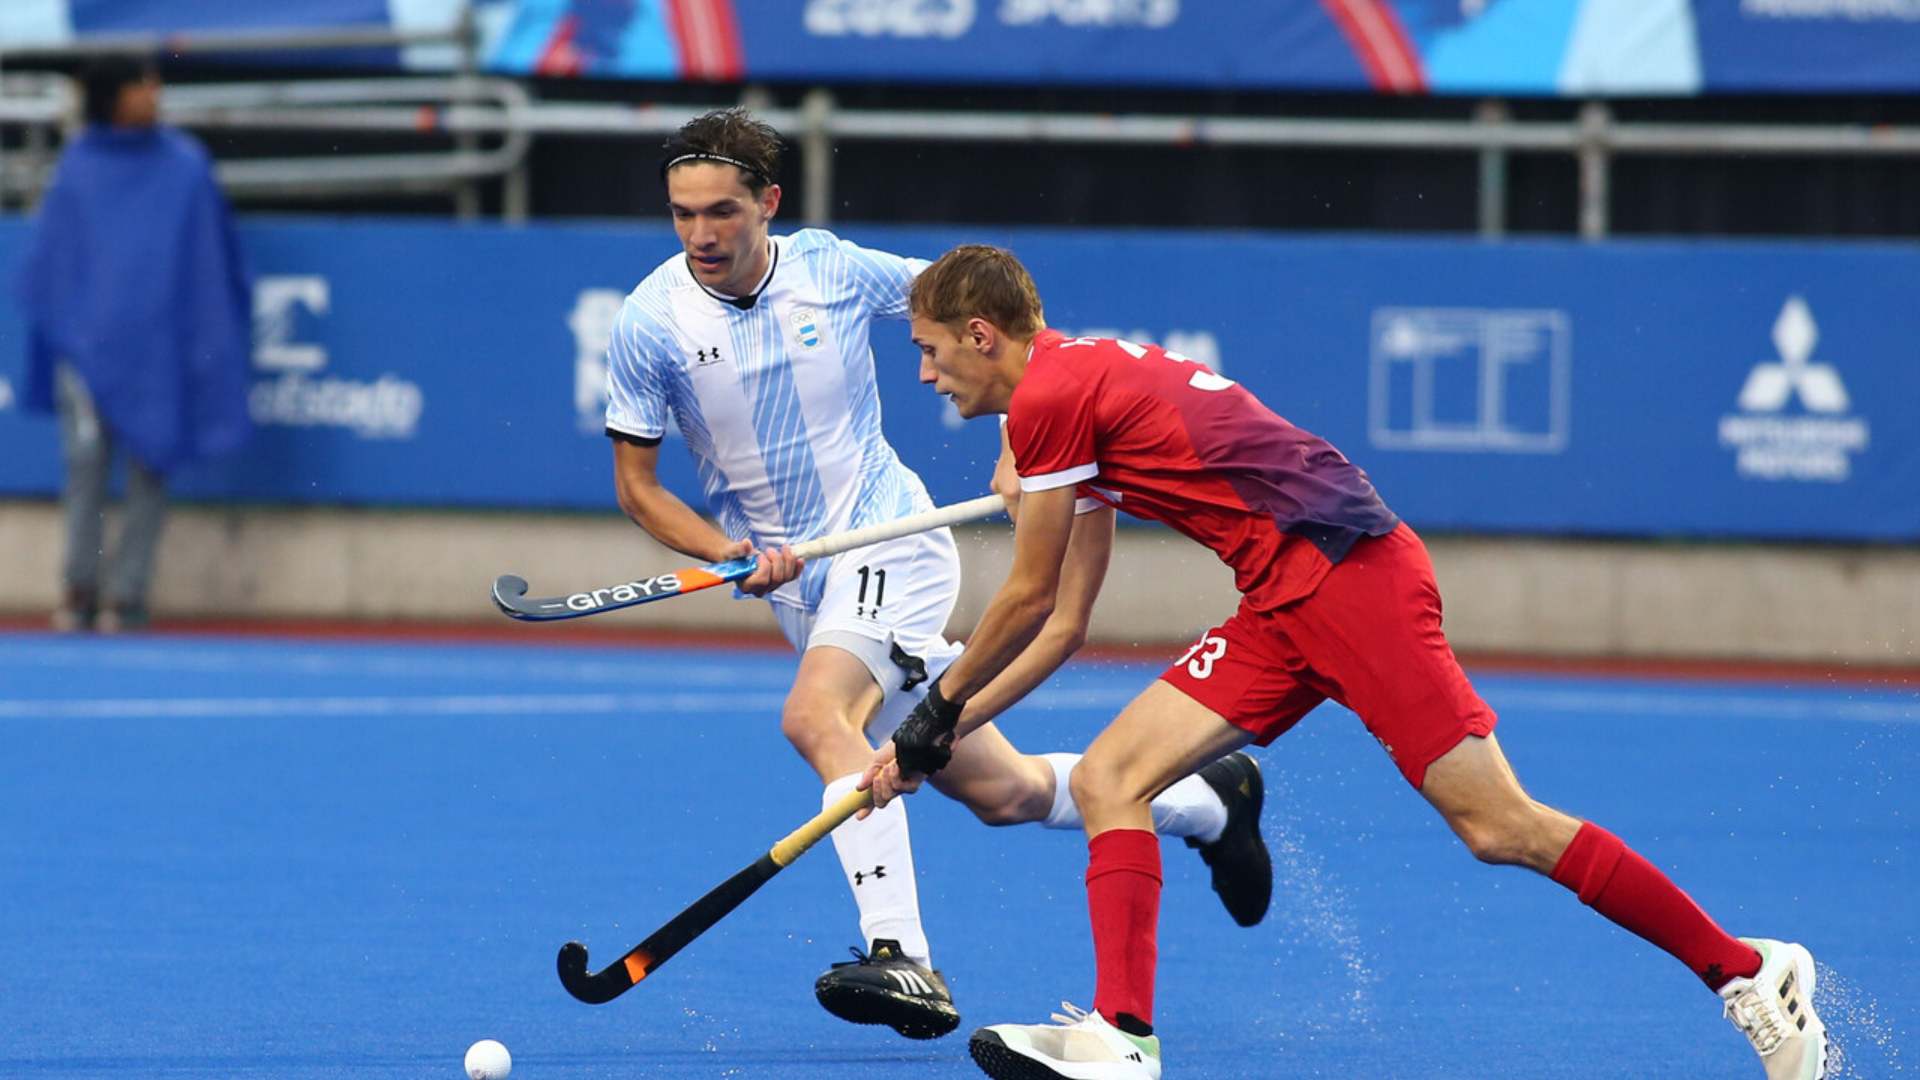 Argentina to defend Pan American gold in male hockey after defeating the US